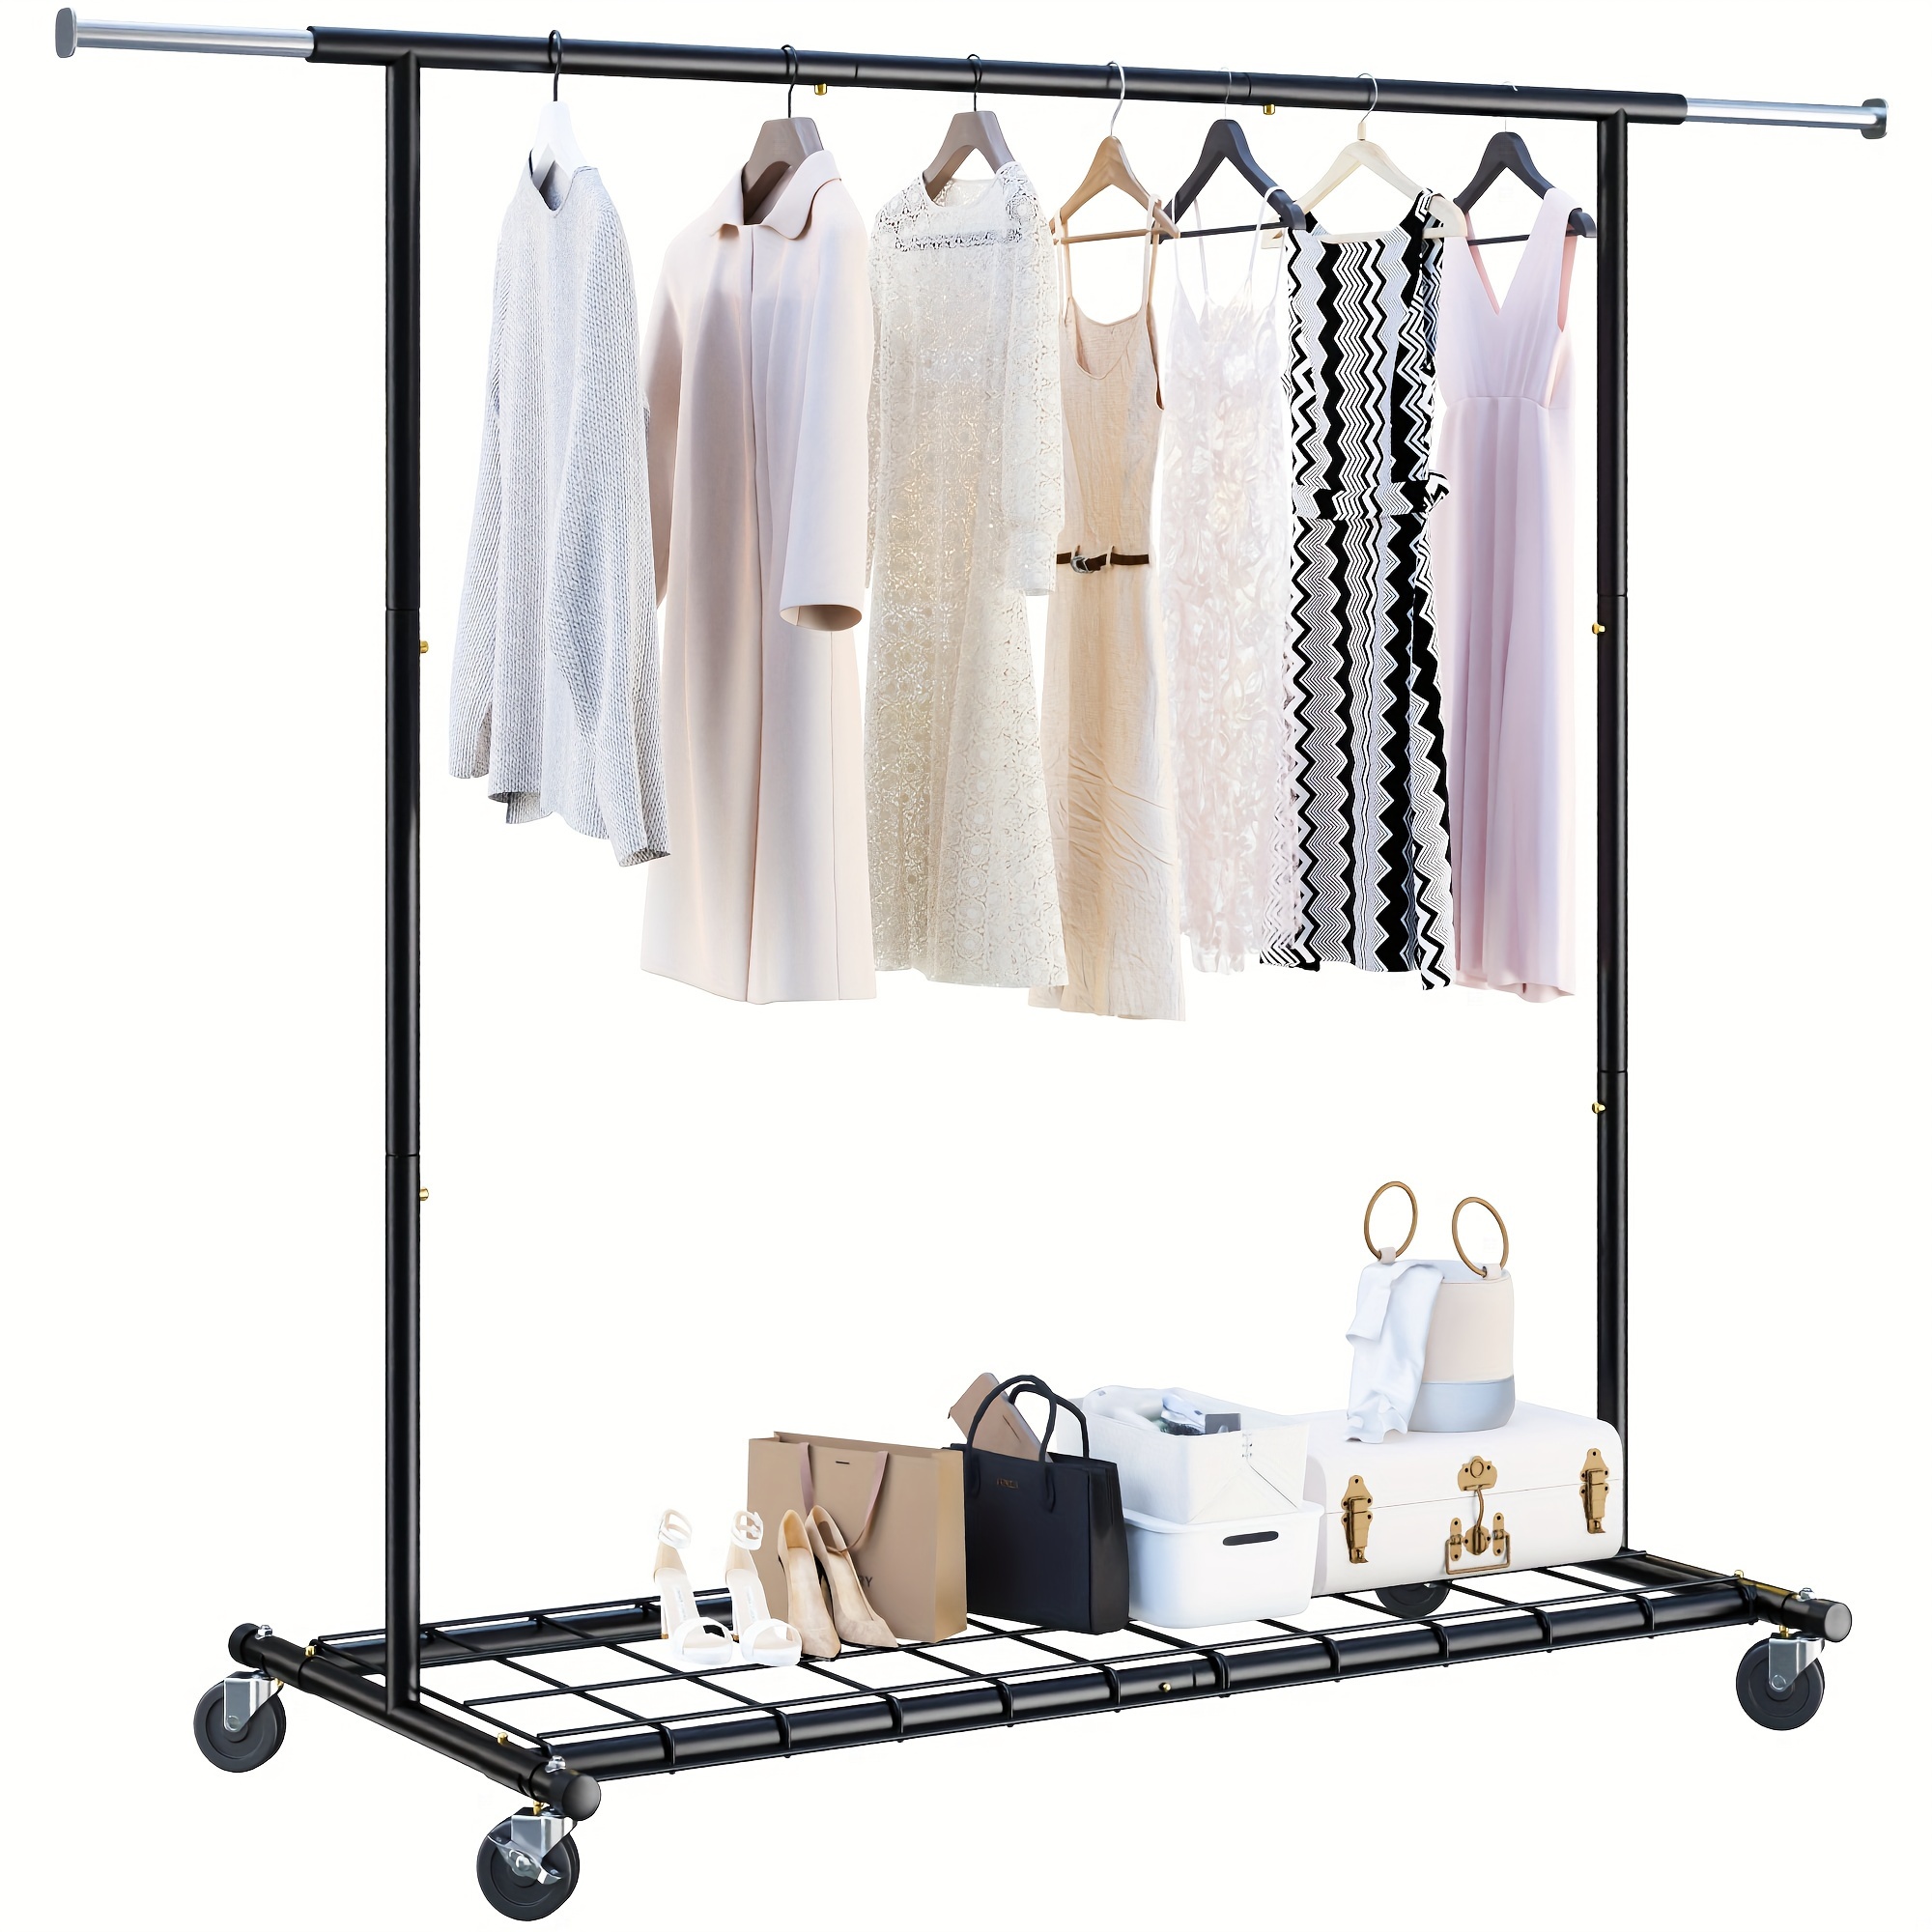 

Clothes Rack Clothing Racks For Hanging Clothes Rolling Clothes Rack Load 250lbs Clothing Rack Heavy Duty Clothes Rack Collapsible Garment Rack Portable Clothing Rack With Wheels, Black